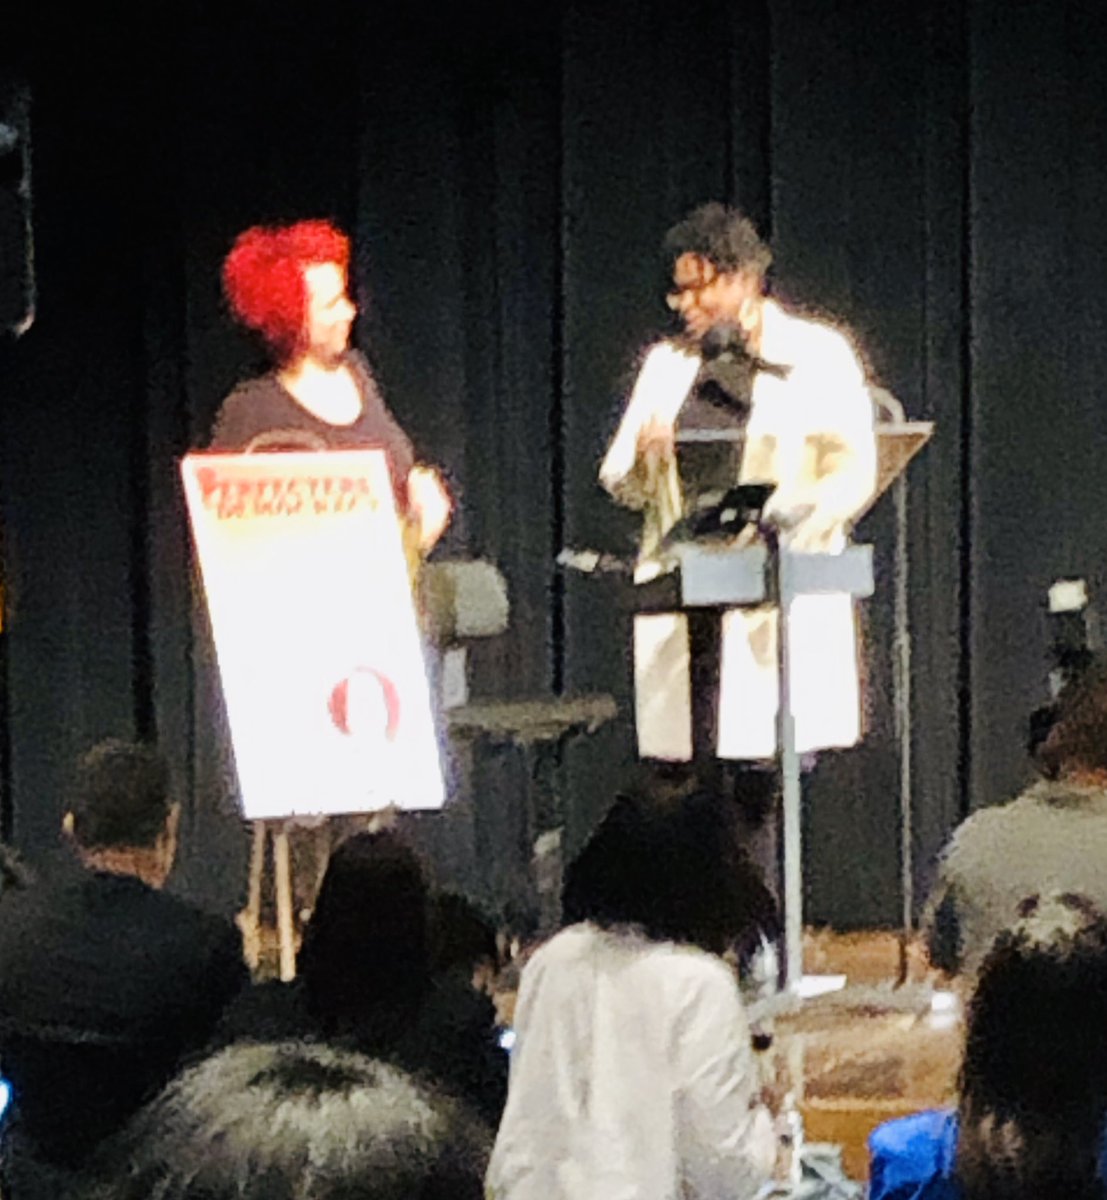 Newark Public Schools welcomes Nikole Hannah-Jones and “The 1619 Project”. This project asks, “What if, finally, in this 400 year, we understand that black people have never been the problem but only the solution?” @nhannahjones @WeAreAvon